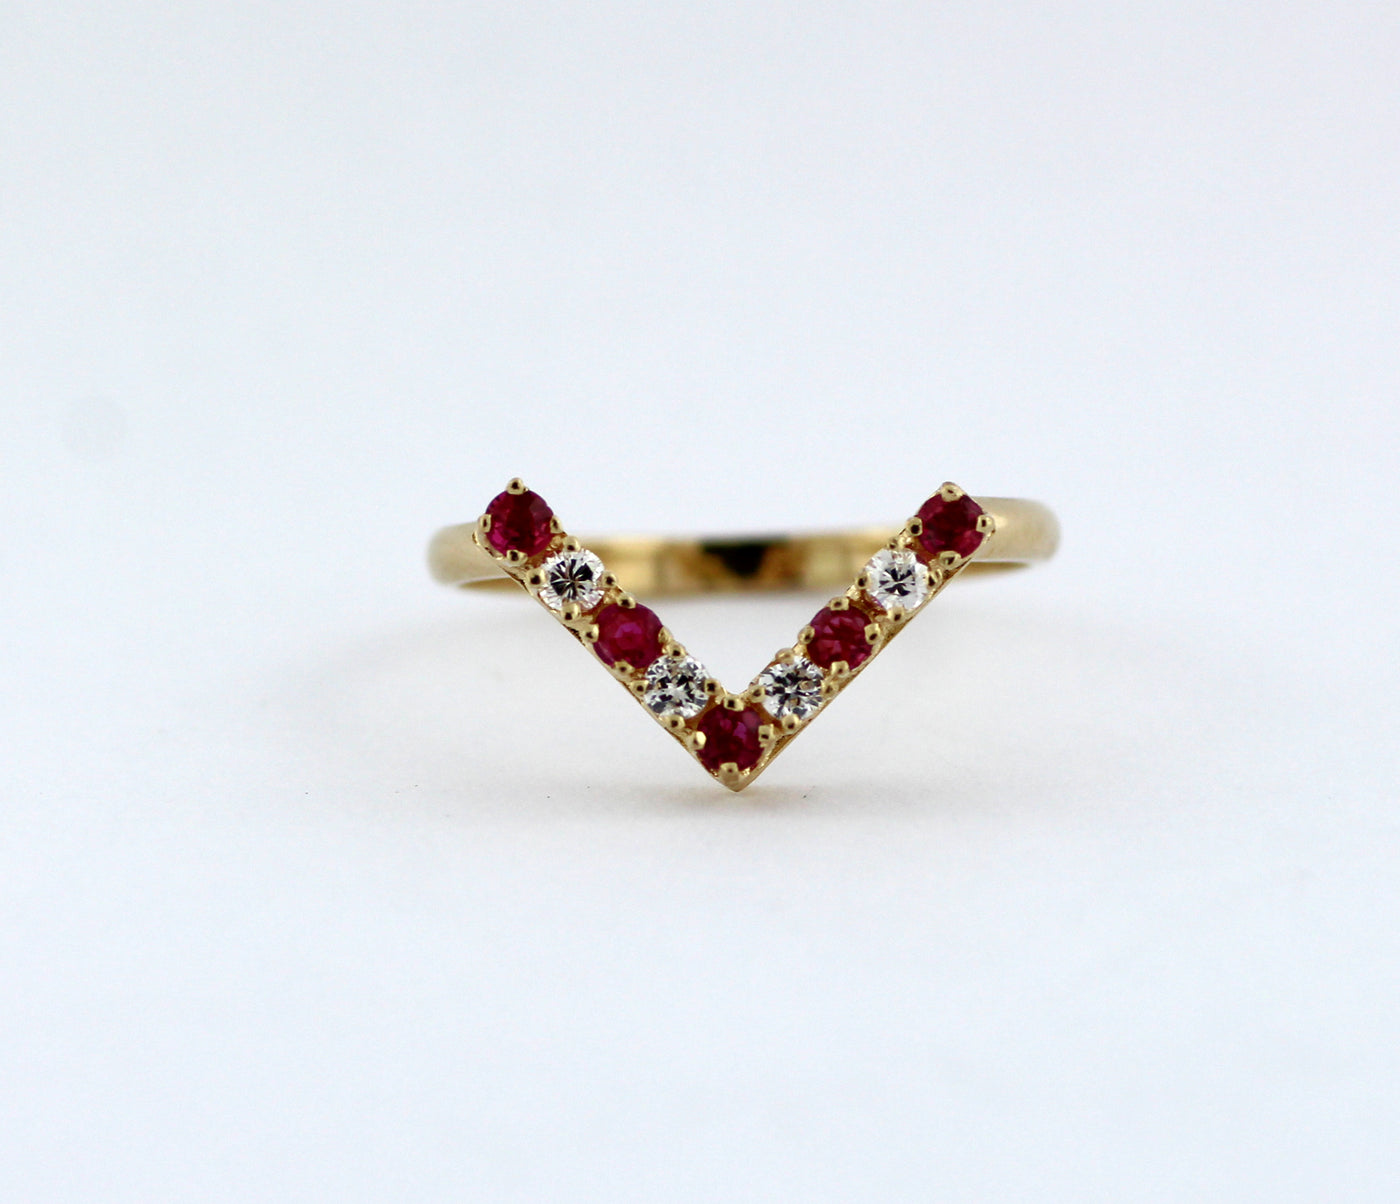 ESTATE 14KY .15 CTTW RUBY AND DIAMOND RING .08 CTTW H-I1